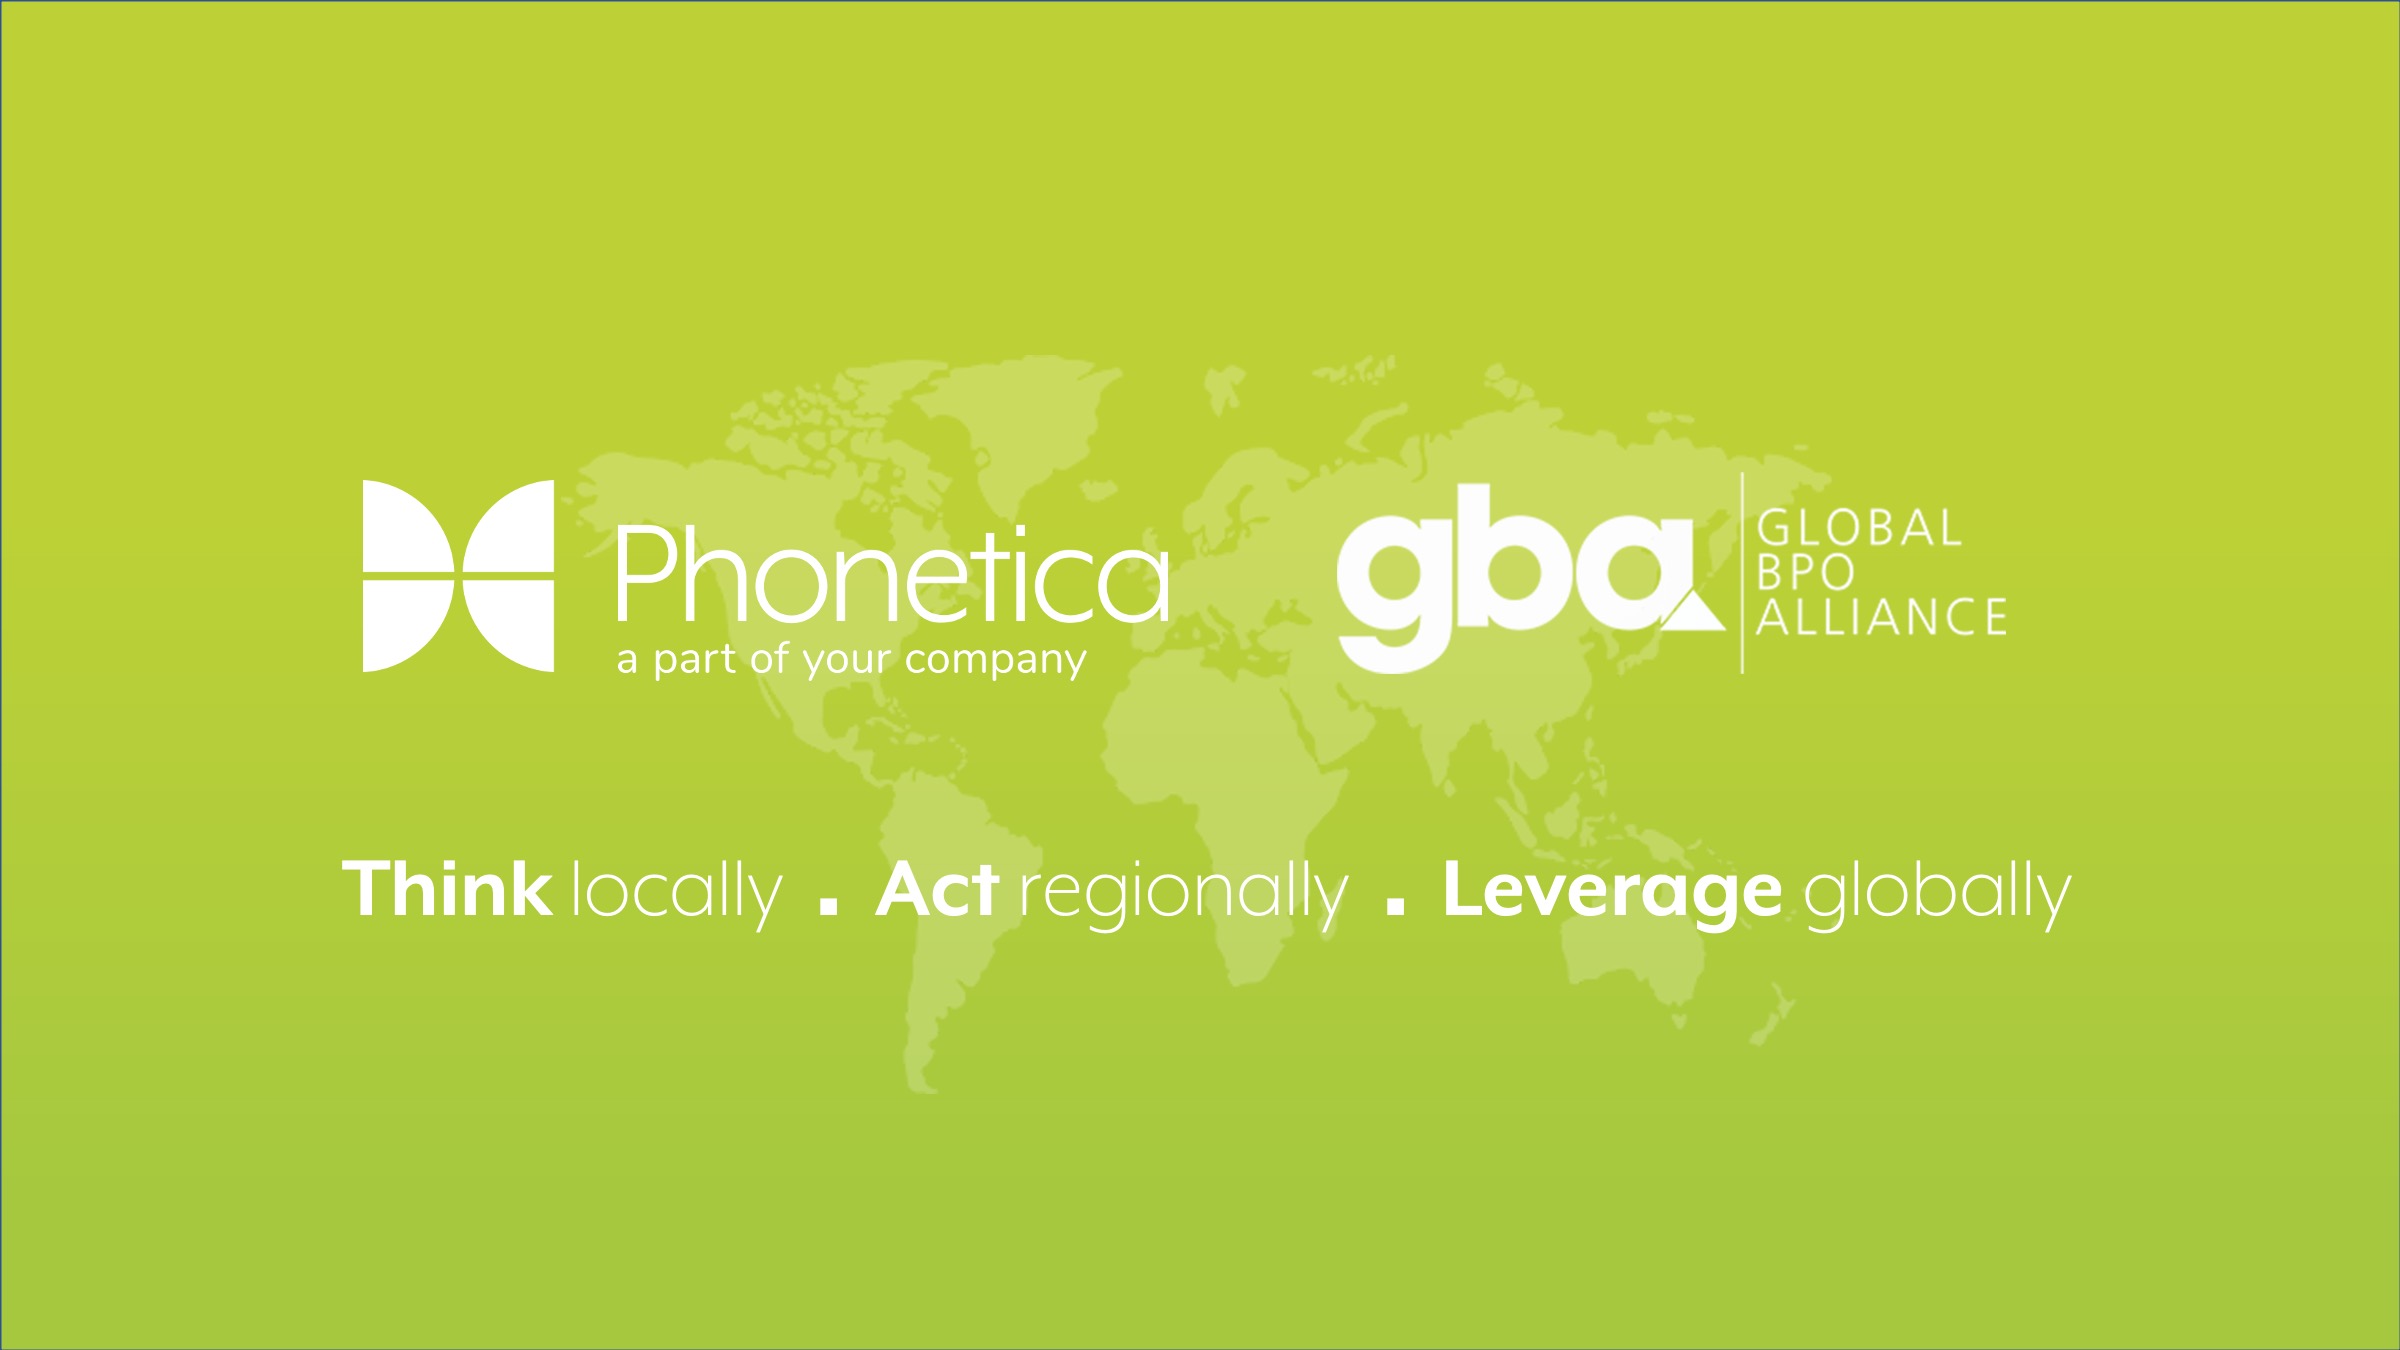 Phonetica and Global BPO Alliance: relations become international